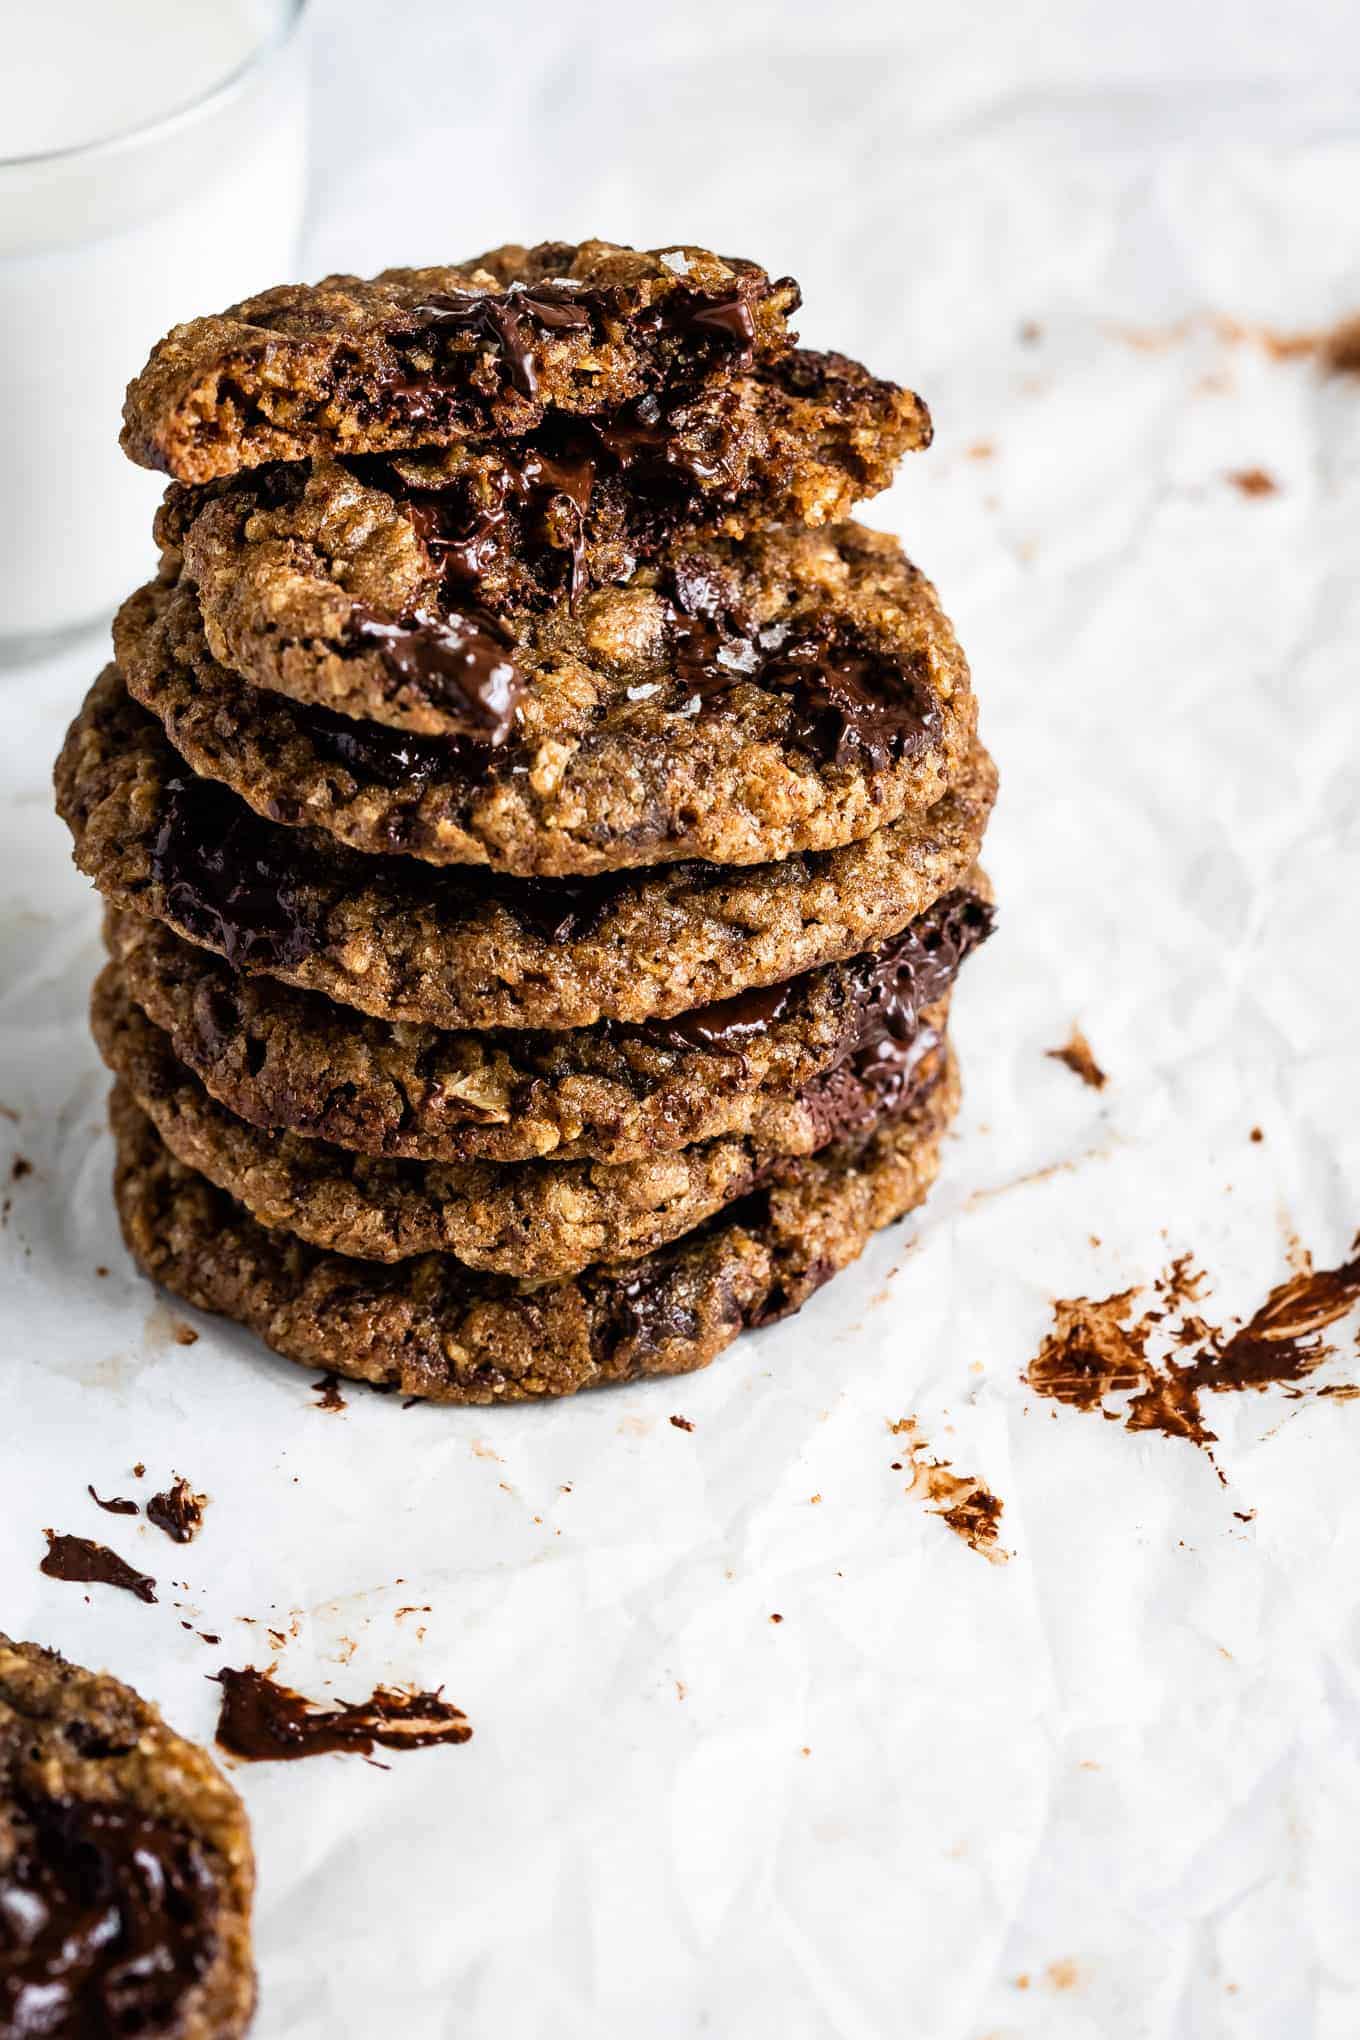 Chewy Gluten-Free Chocolate Chip Cookies